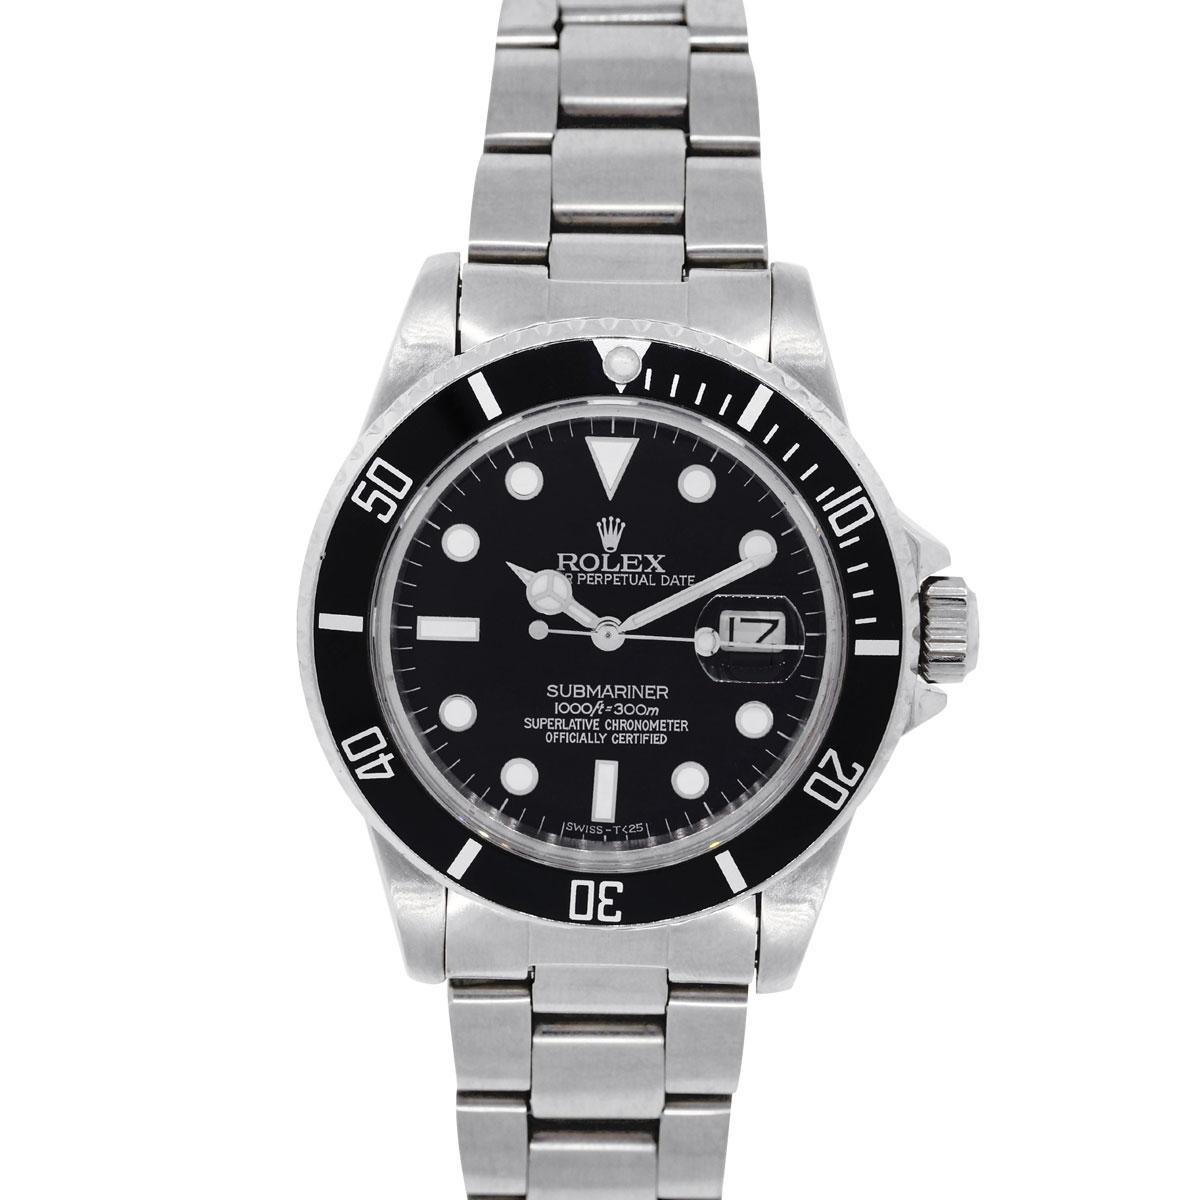 Brand: Rolex
MPN: 16800
Model: Submariner
Case Material: Stainless Steel
Case Diameter: 40mm
Crystal: Scratch resistant sapphire
Bezel: Black rotating bezel
Dial: Black dial with stainless steel luminescent hour marker and hands. Date is displayed